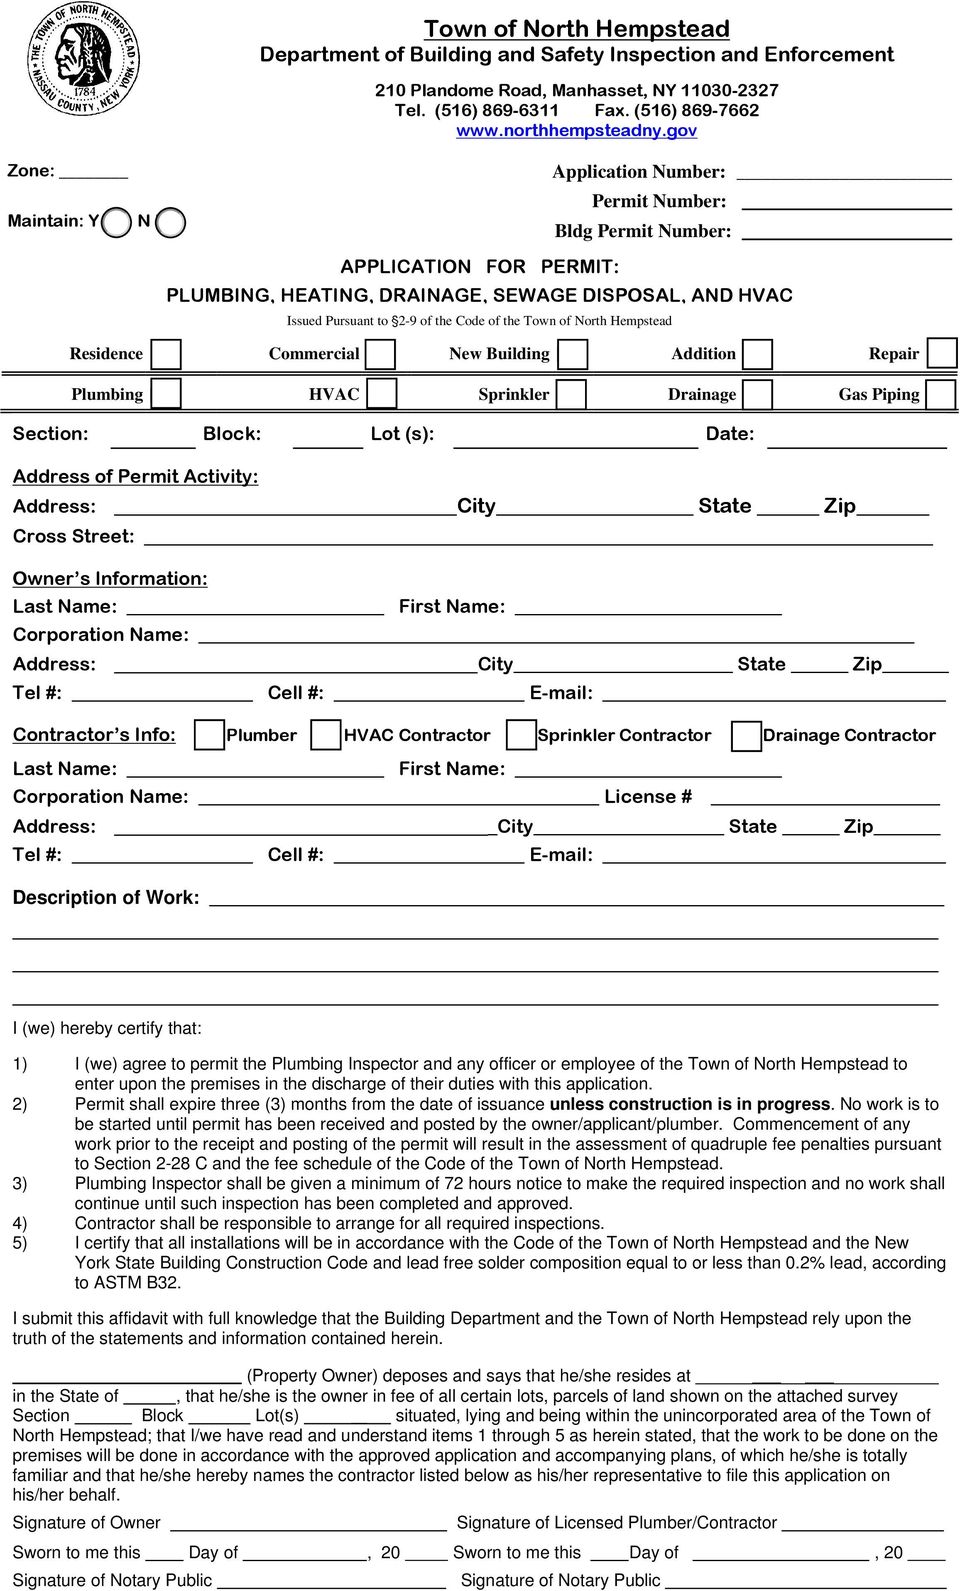 gov Application Number: _ Permit Number: Bldg Permit Number: APPLICATION FOR PERMIT: PLUMBING, HEATING, DRAINAGE, SEWAGE DISPOSAL, AND HVAC Issued Pursuant to '2-9 of the Code of the Town of North